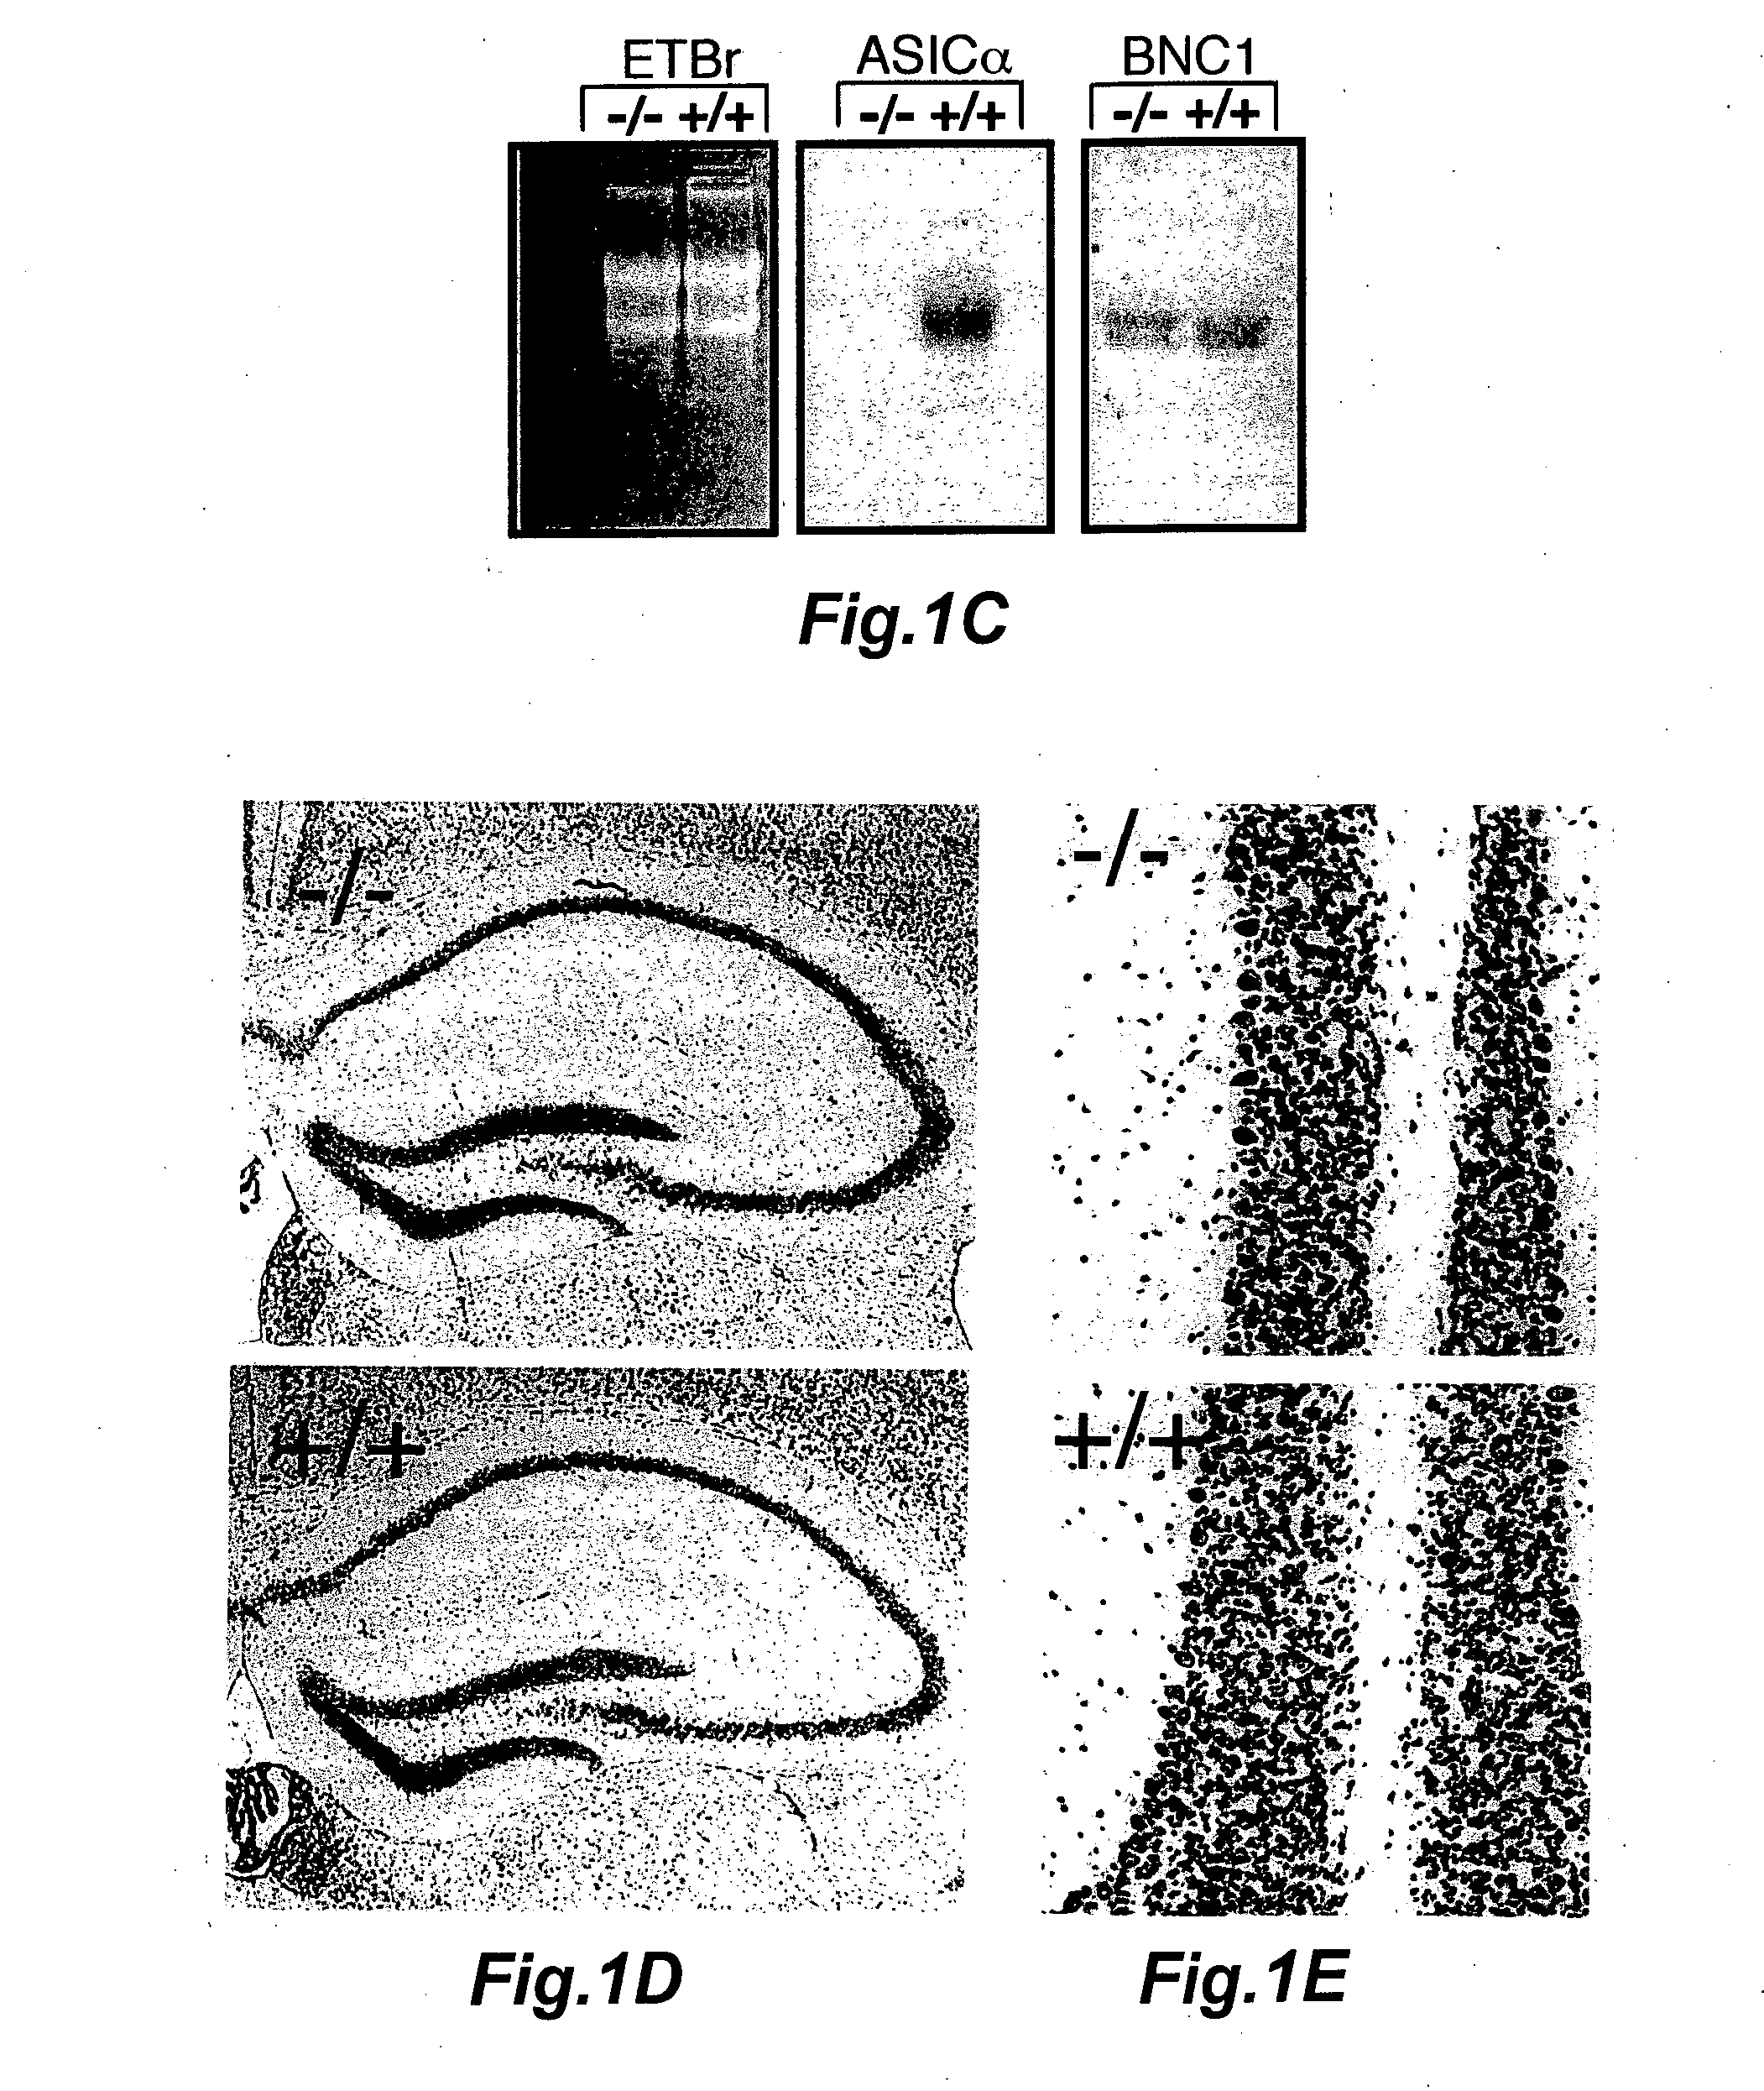 Novel compositions and methods for modulating the acid-sensing ion channel (ASIC)